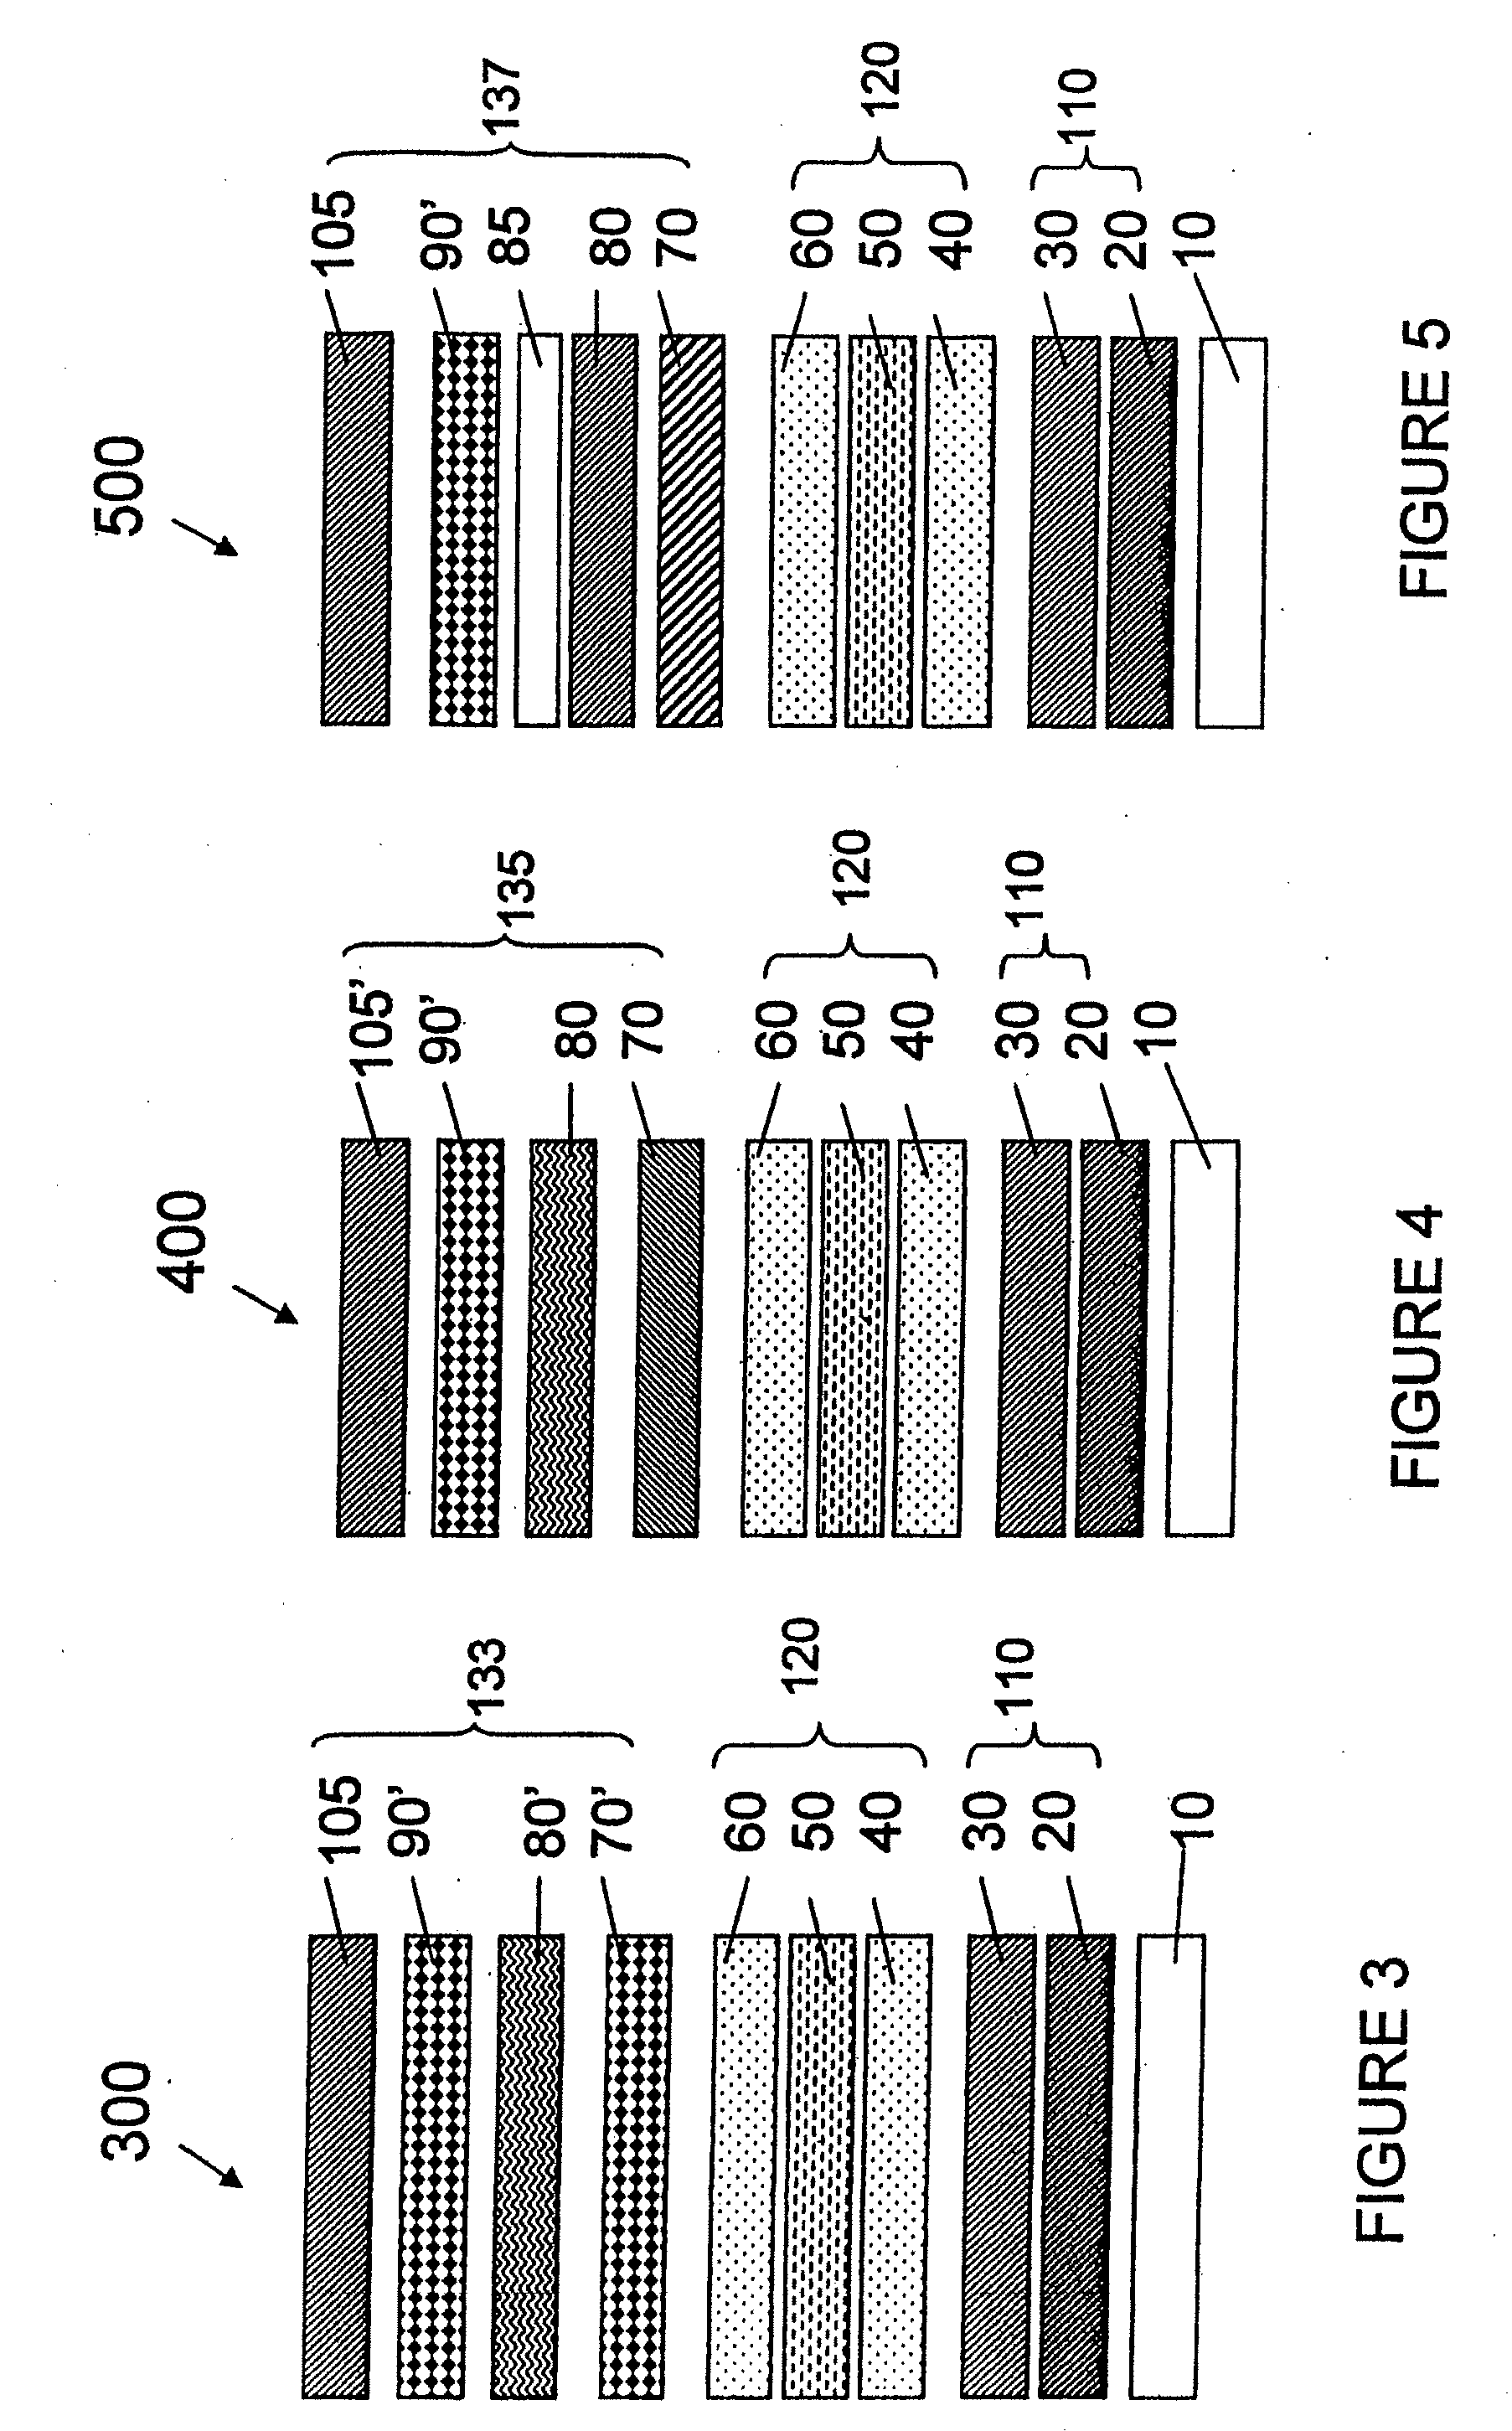 Conductive multilayer stack